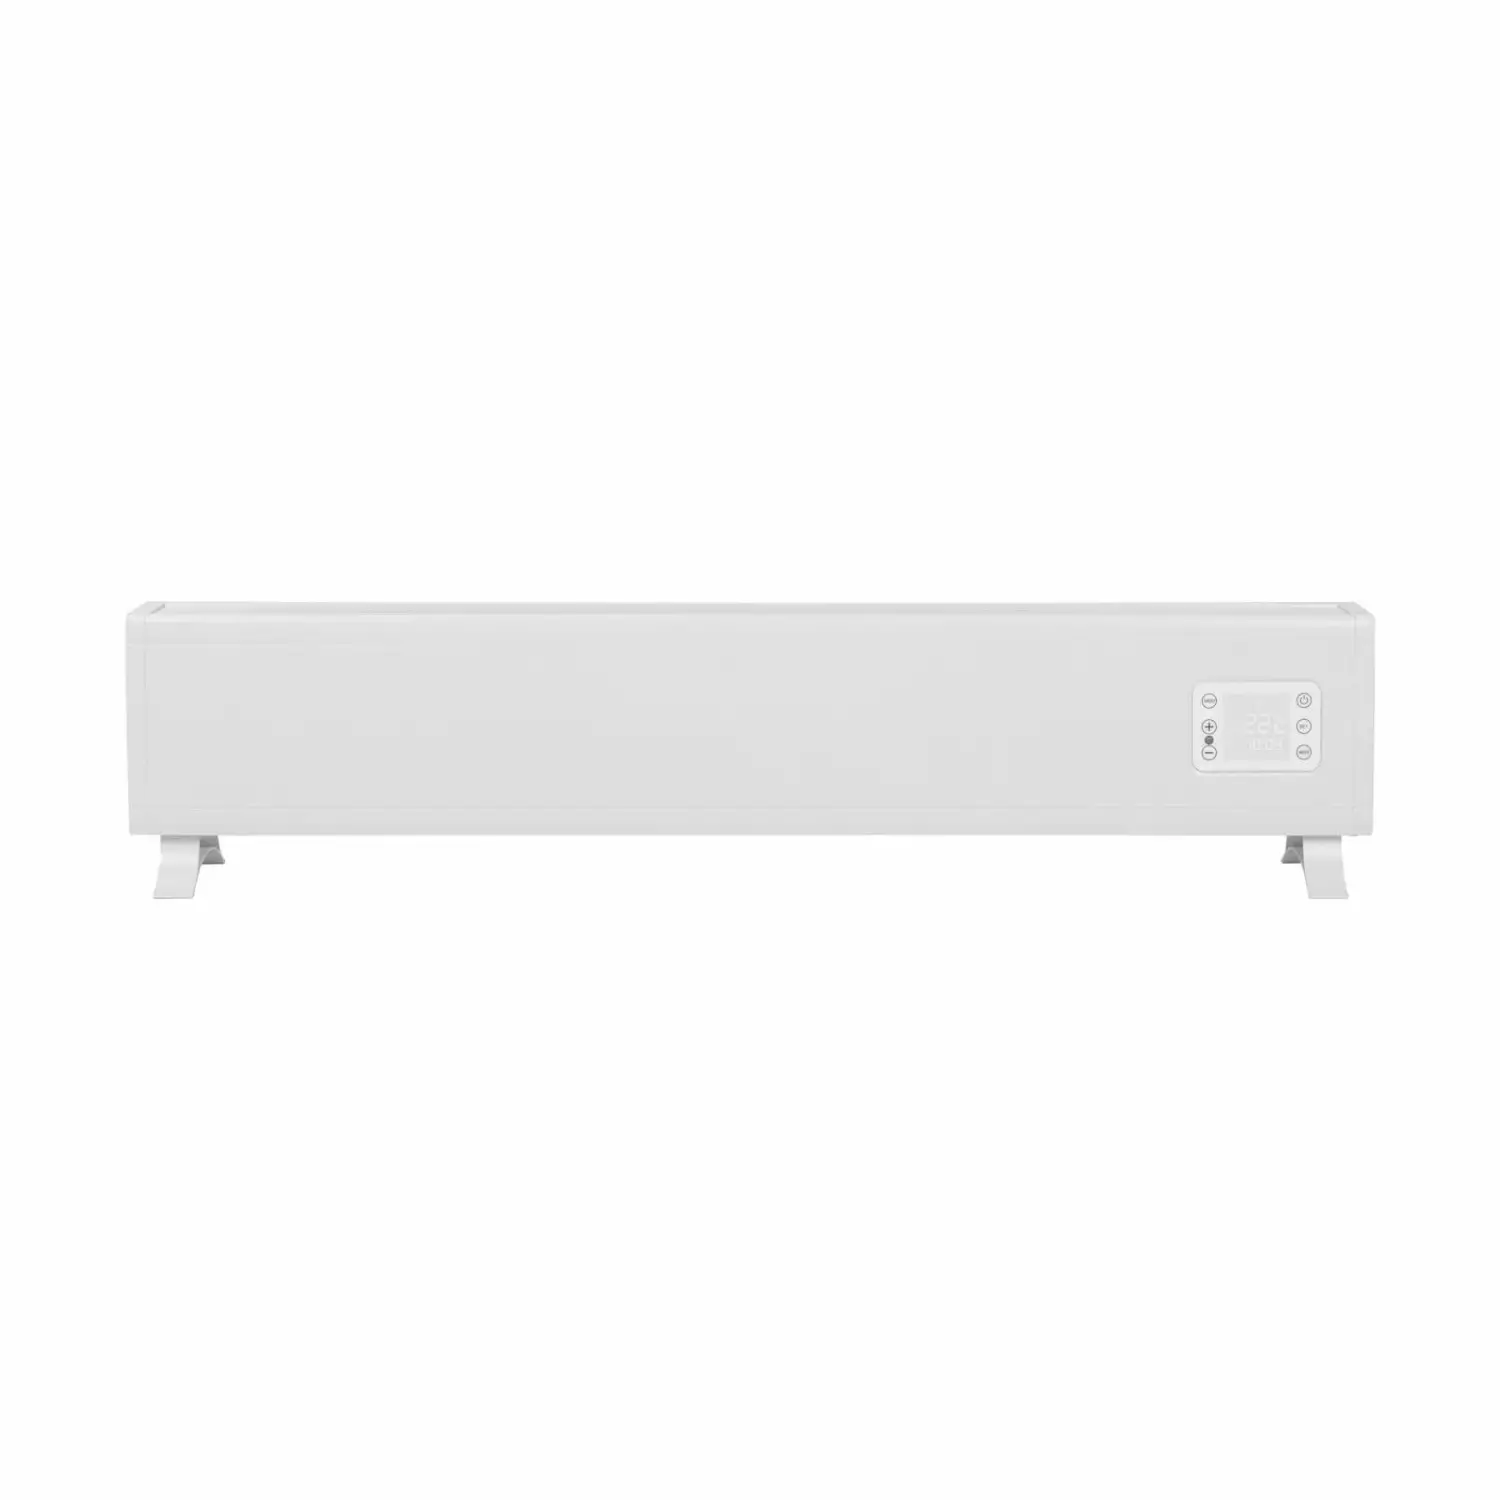 Eurom Alutherm Baseboard 1500 Wi-Fi White Convectorkachel - 1500W - 60m3